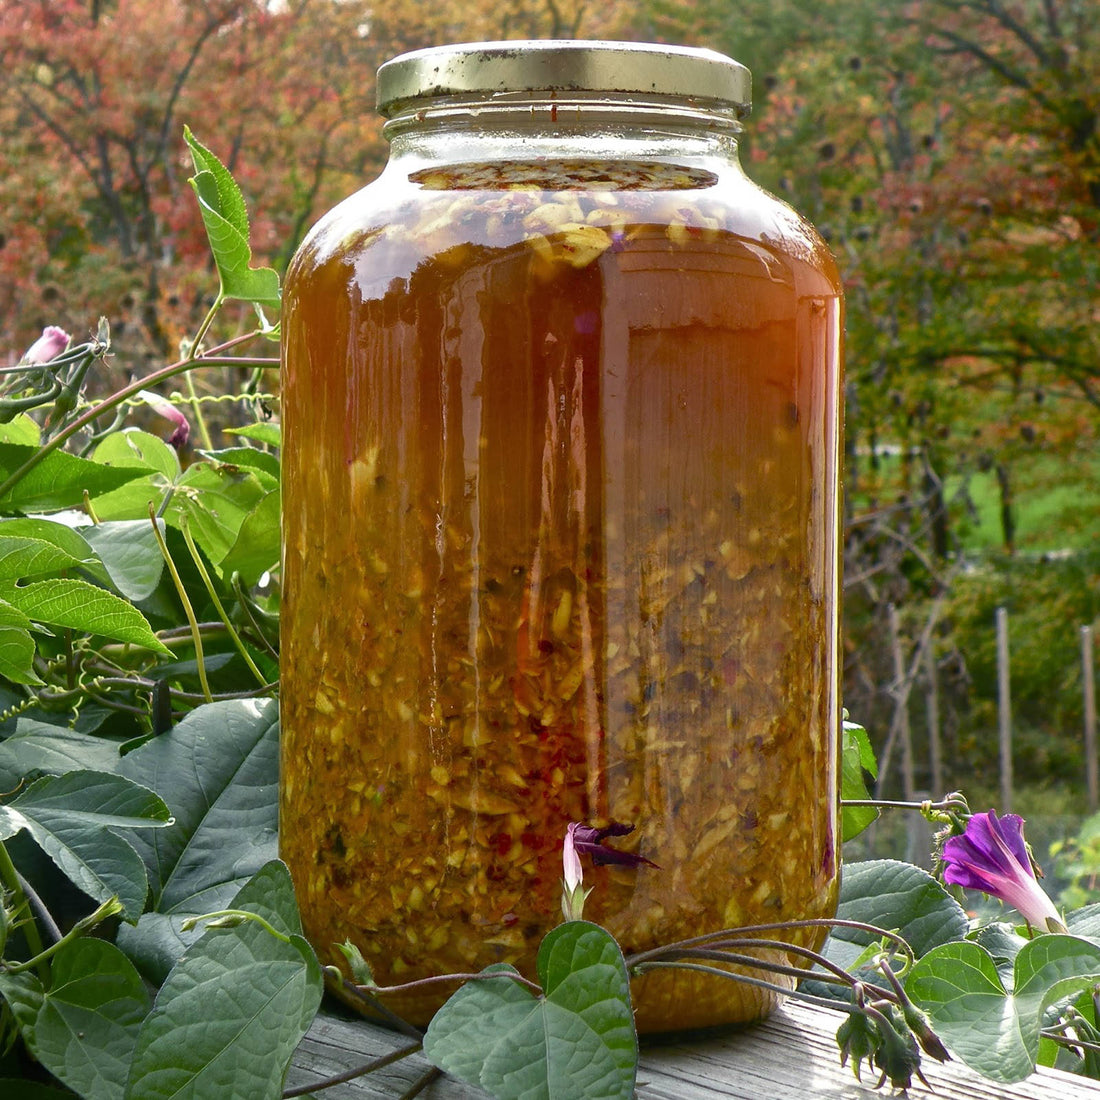 Make your Own: Fire Cider